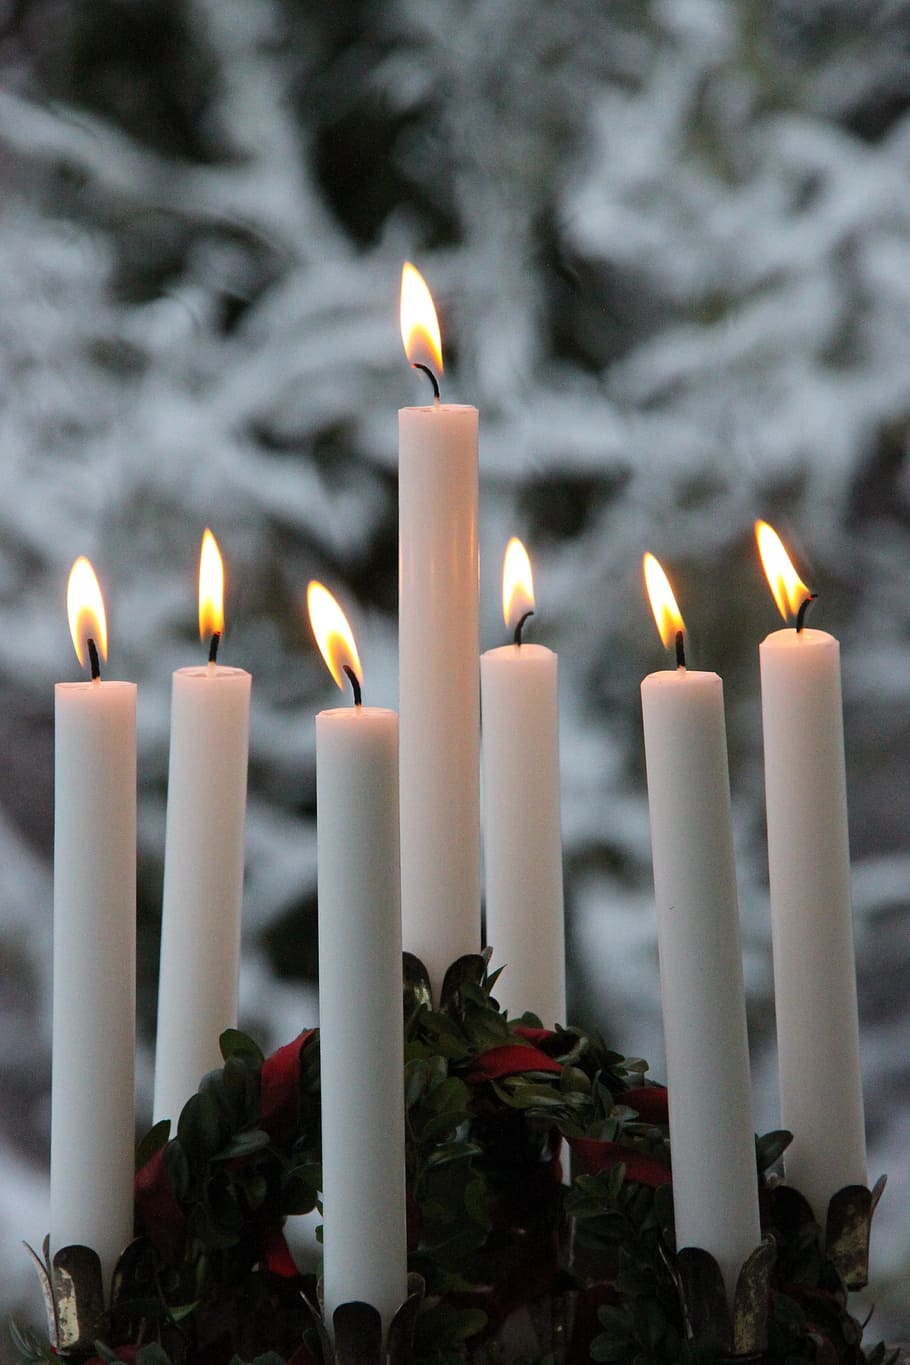 candlelight, winter, flame, snow, christmas, lucia, lucia celebration, lucia light, lucia crown, december